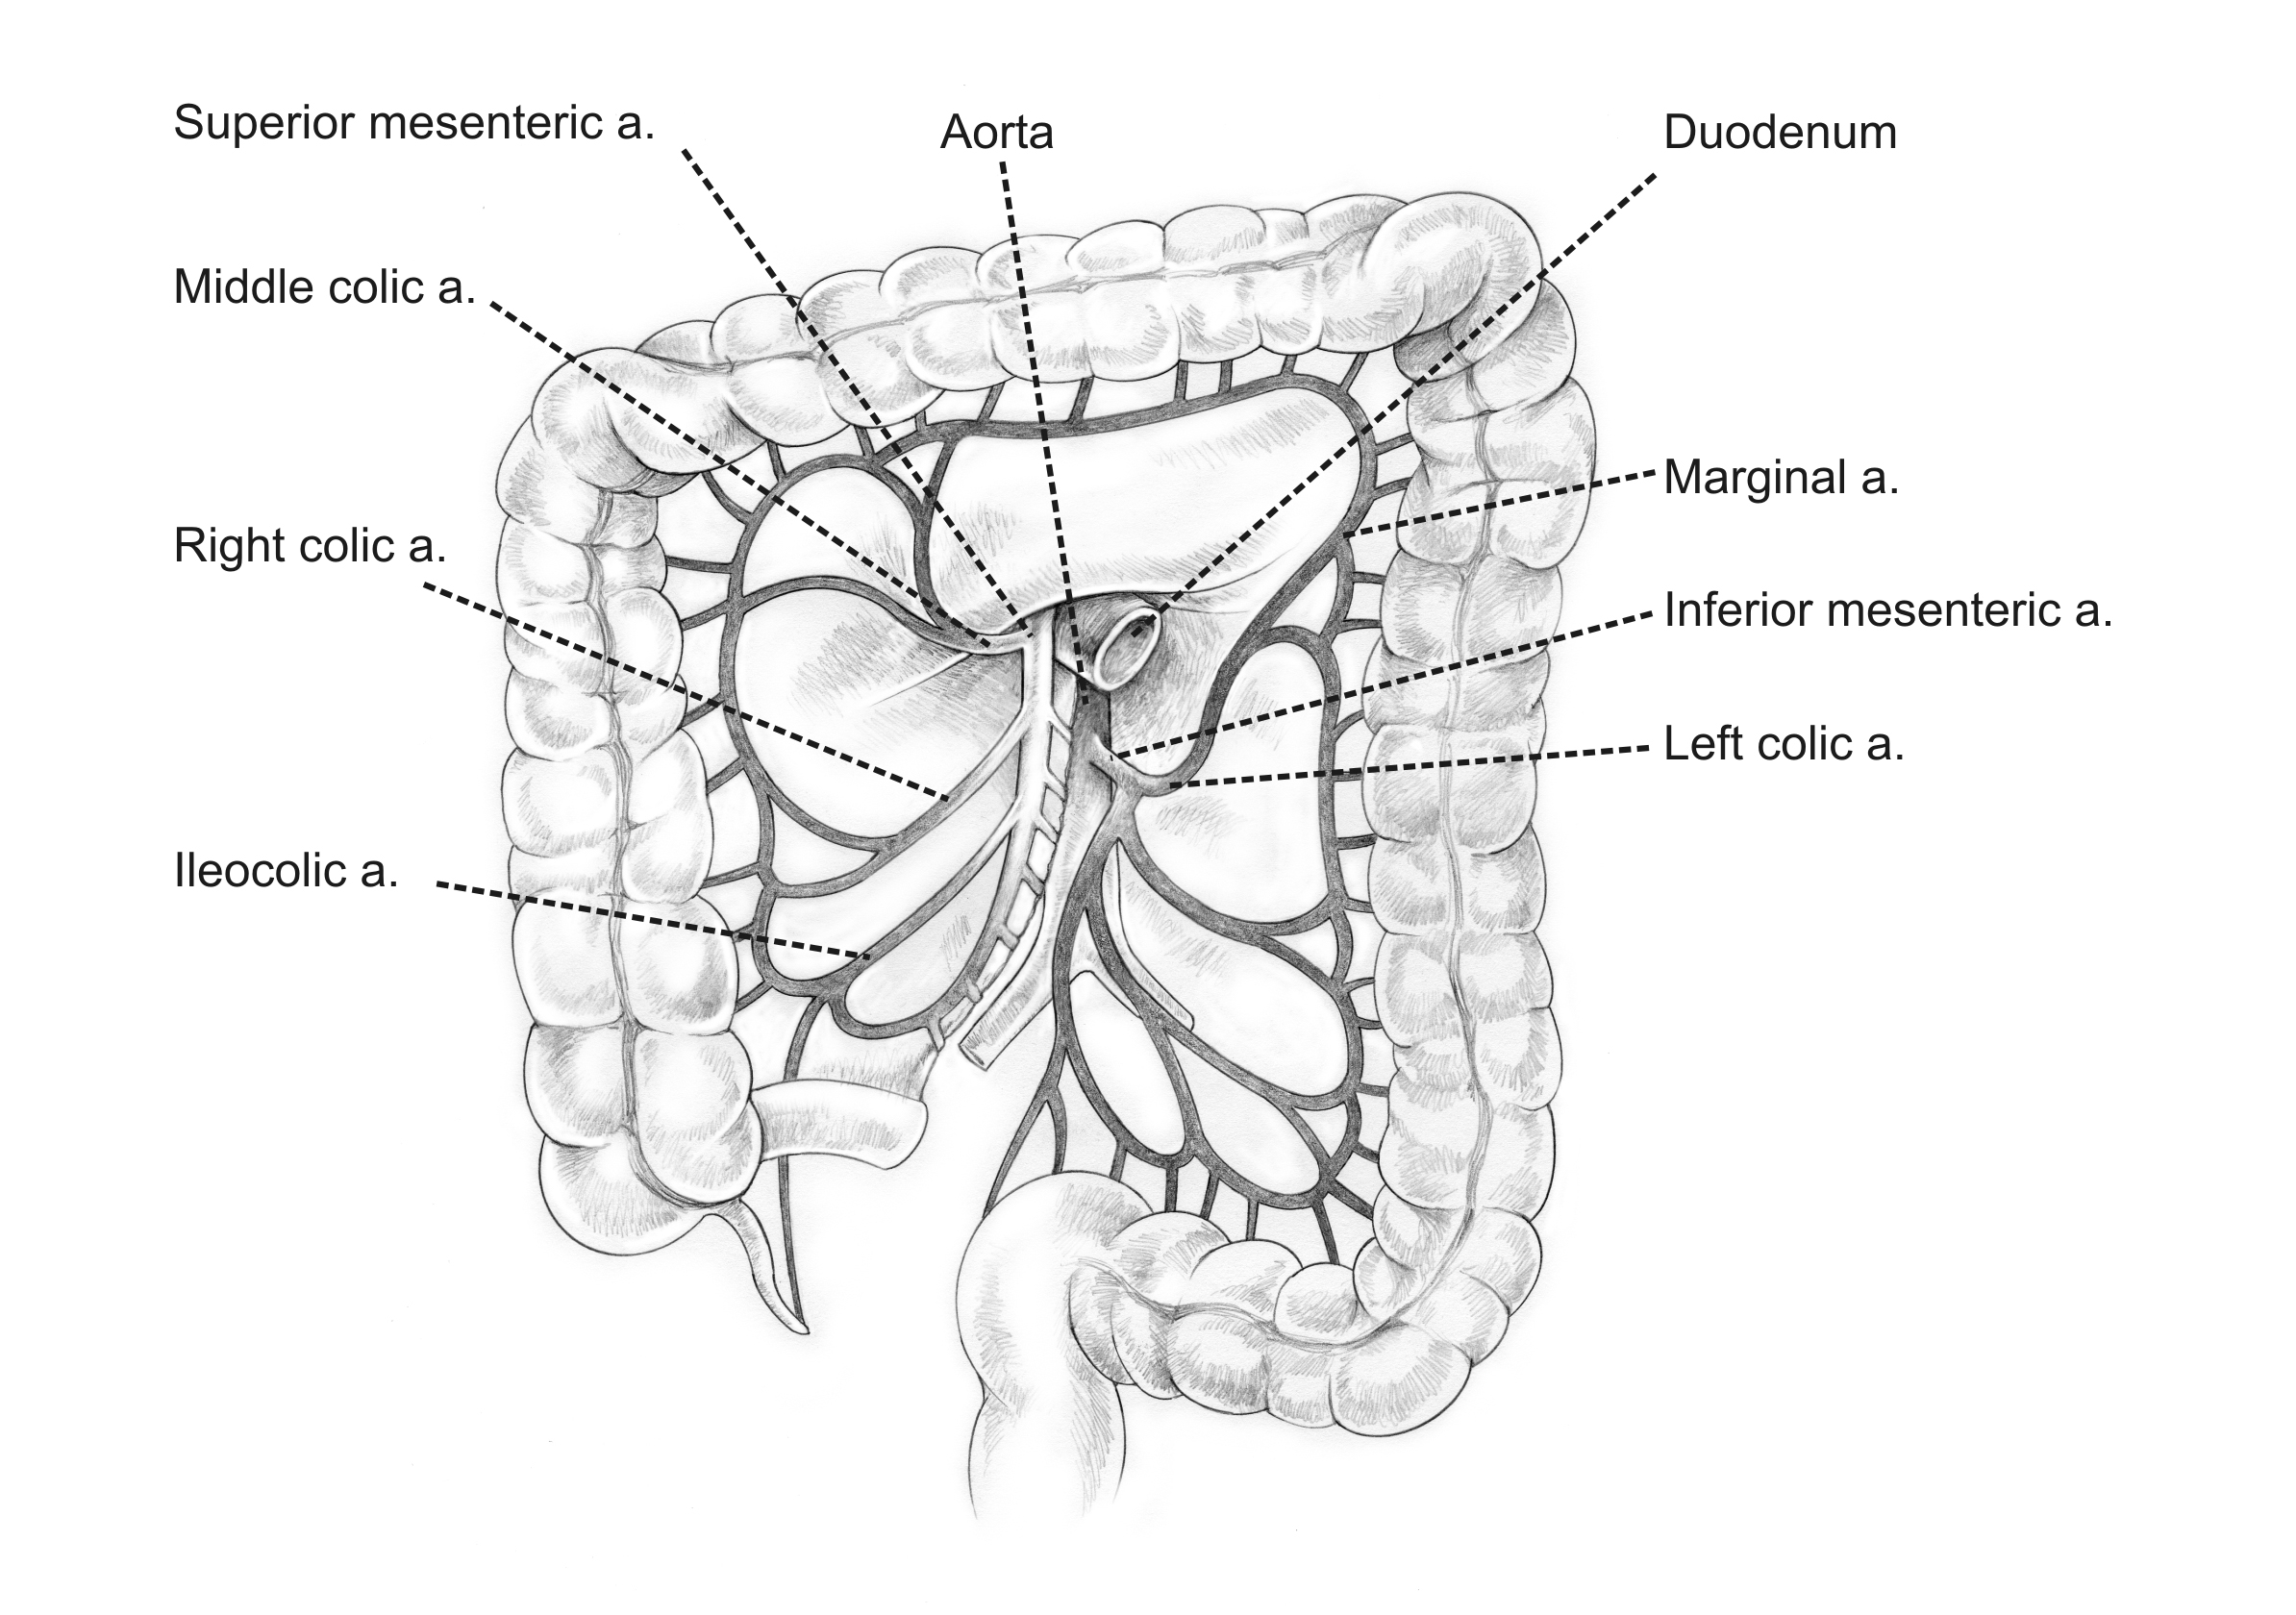 Anatomical location of the ileococal artery (source)